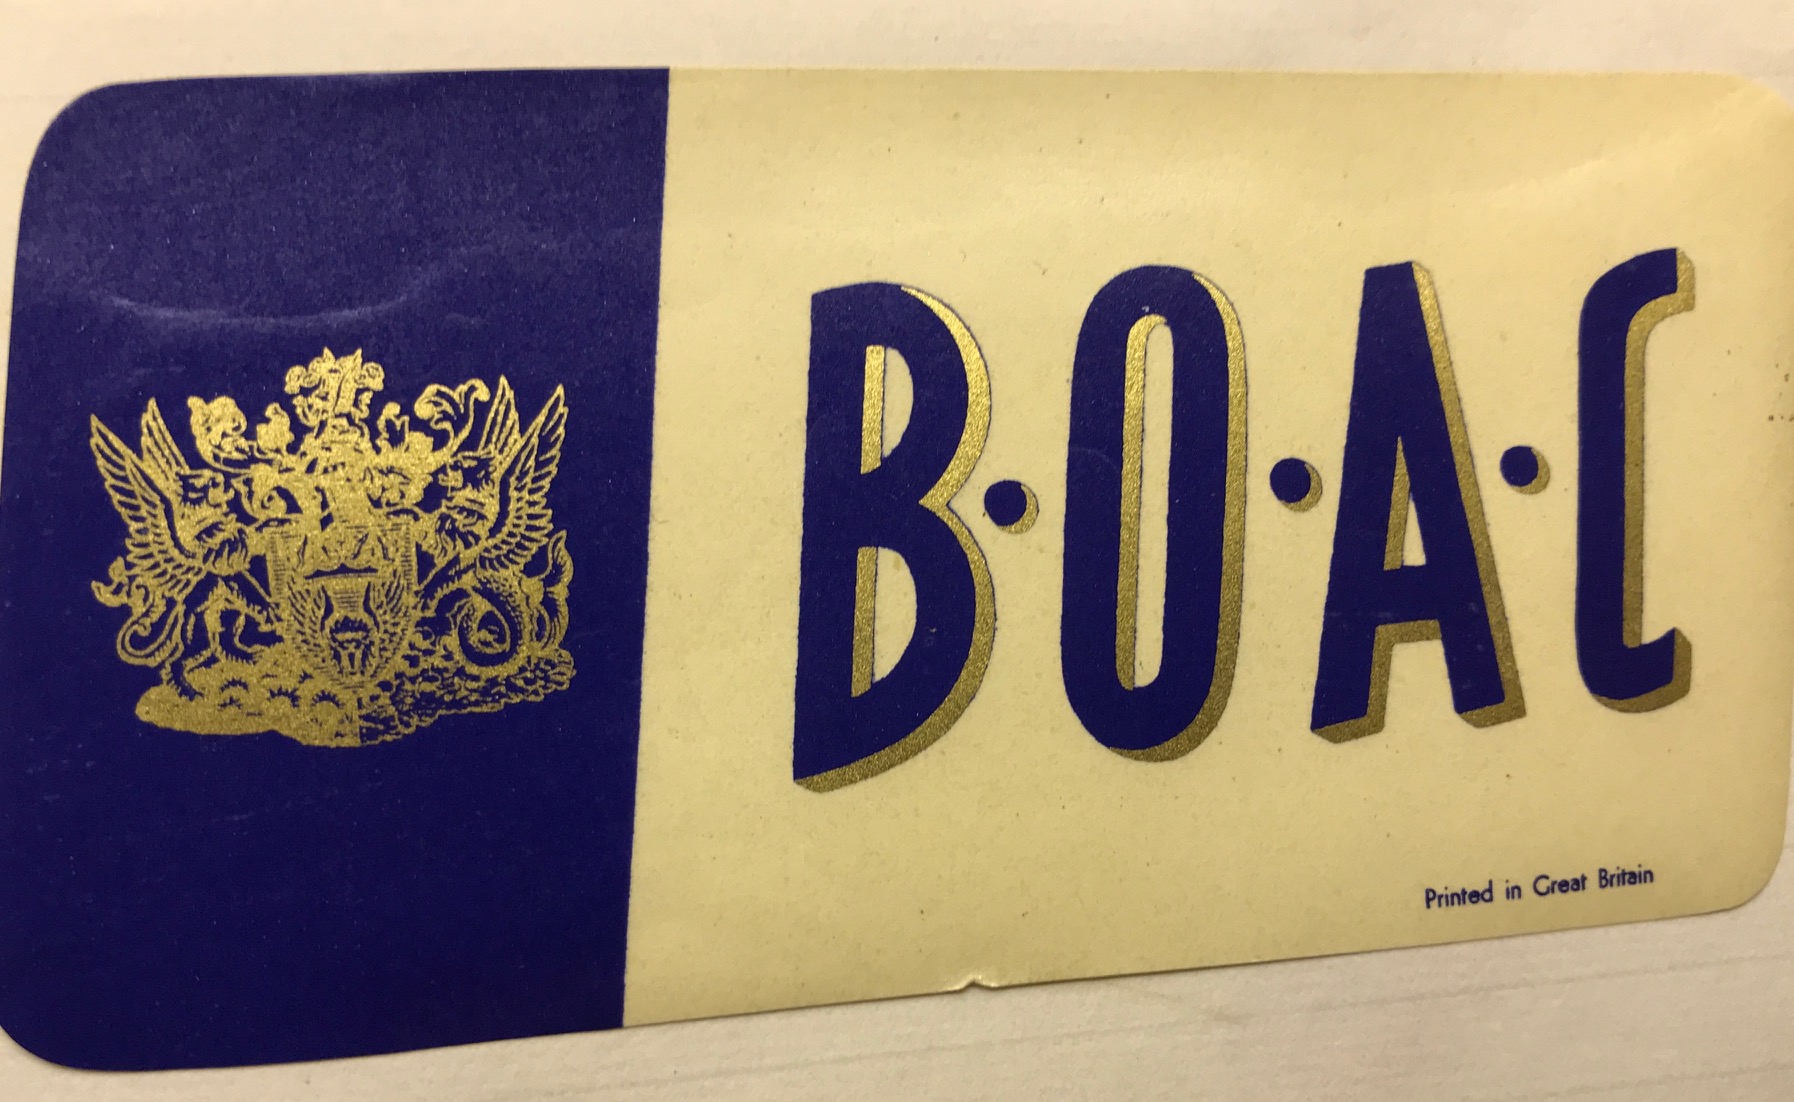 Trevor's Stickies: British Overseas Airways Corporation. Since 1939, BOAC was Britain’s most famous airline. Ironically, formed by a merger of Imperial Airways and British Airways Ltd. Especially overseas. It joined with BEA (British European Airways) to form today’s British Airways in 1974. Famous for its rather stuffy, elitist imagery, its sticky labels followed suit. But then it flew the world’s first jet airline. The Comet. And later, of course, Concorde.